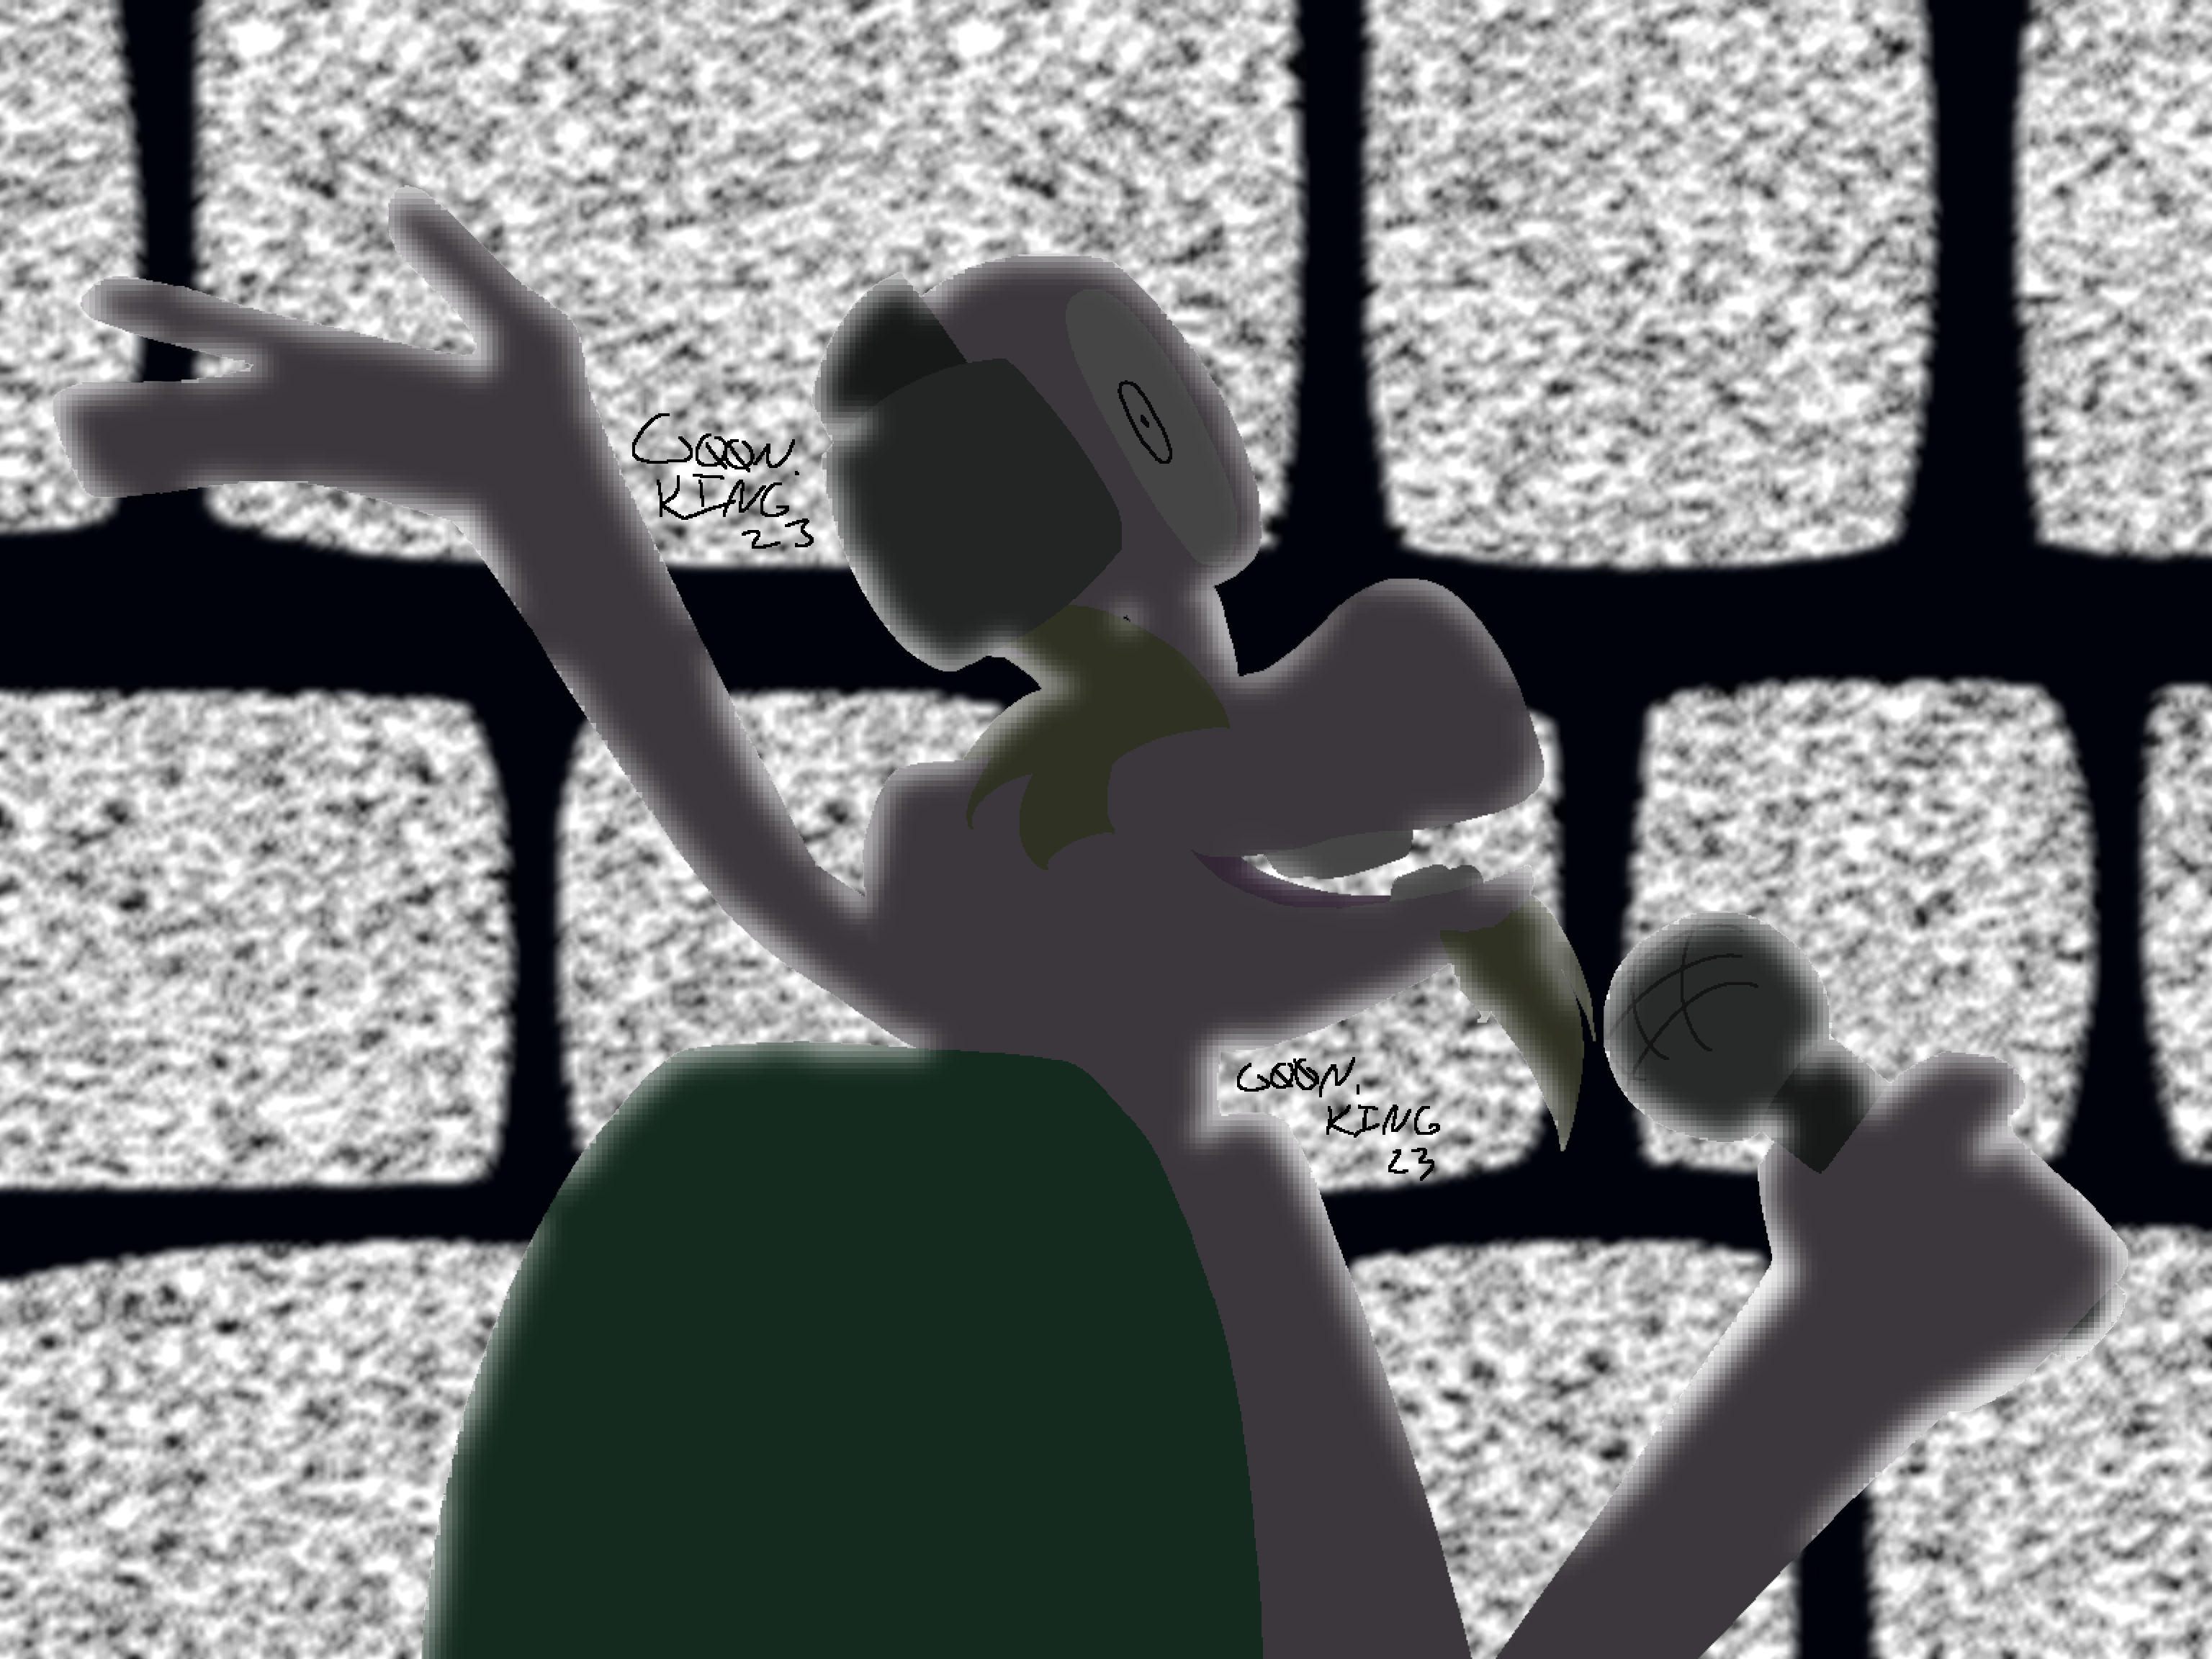 bust(?) shot of escargoon wearing headphones and holding a mic. he is in a dark room against a wall of tvs that only show static. his right arm is stretched out wide, as if show casing something.